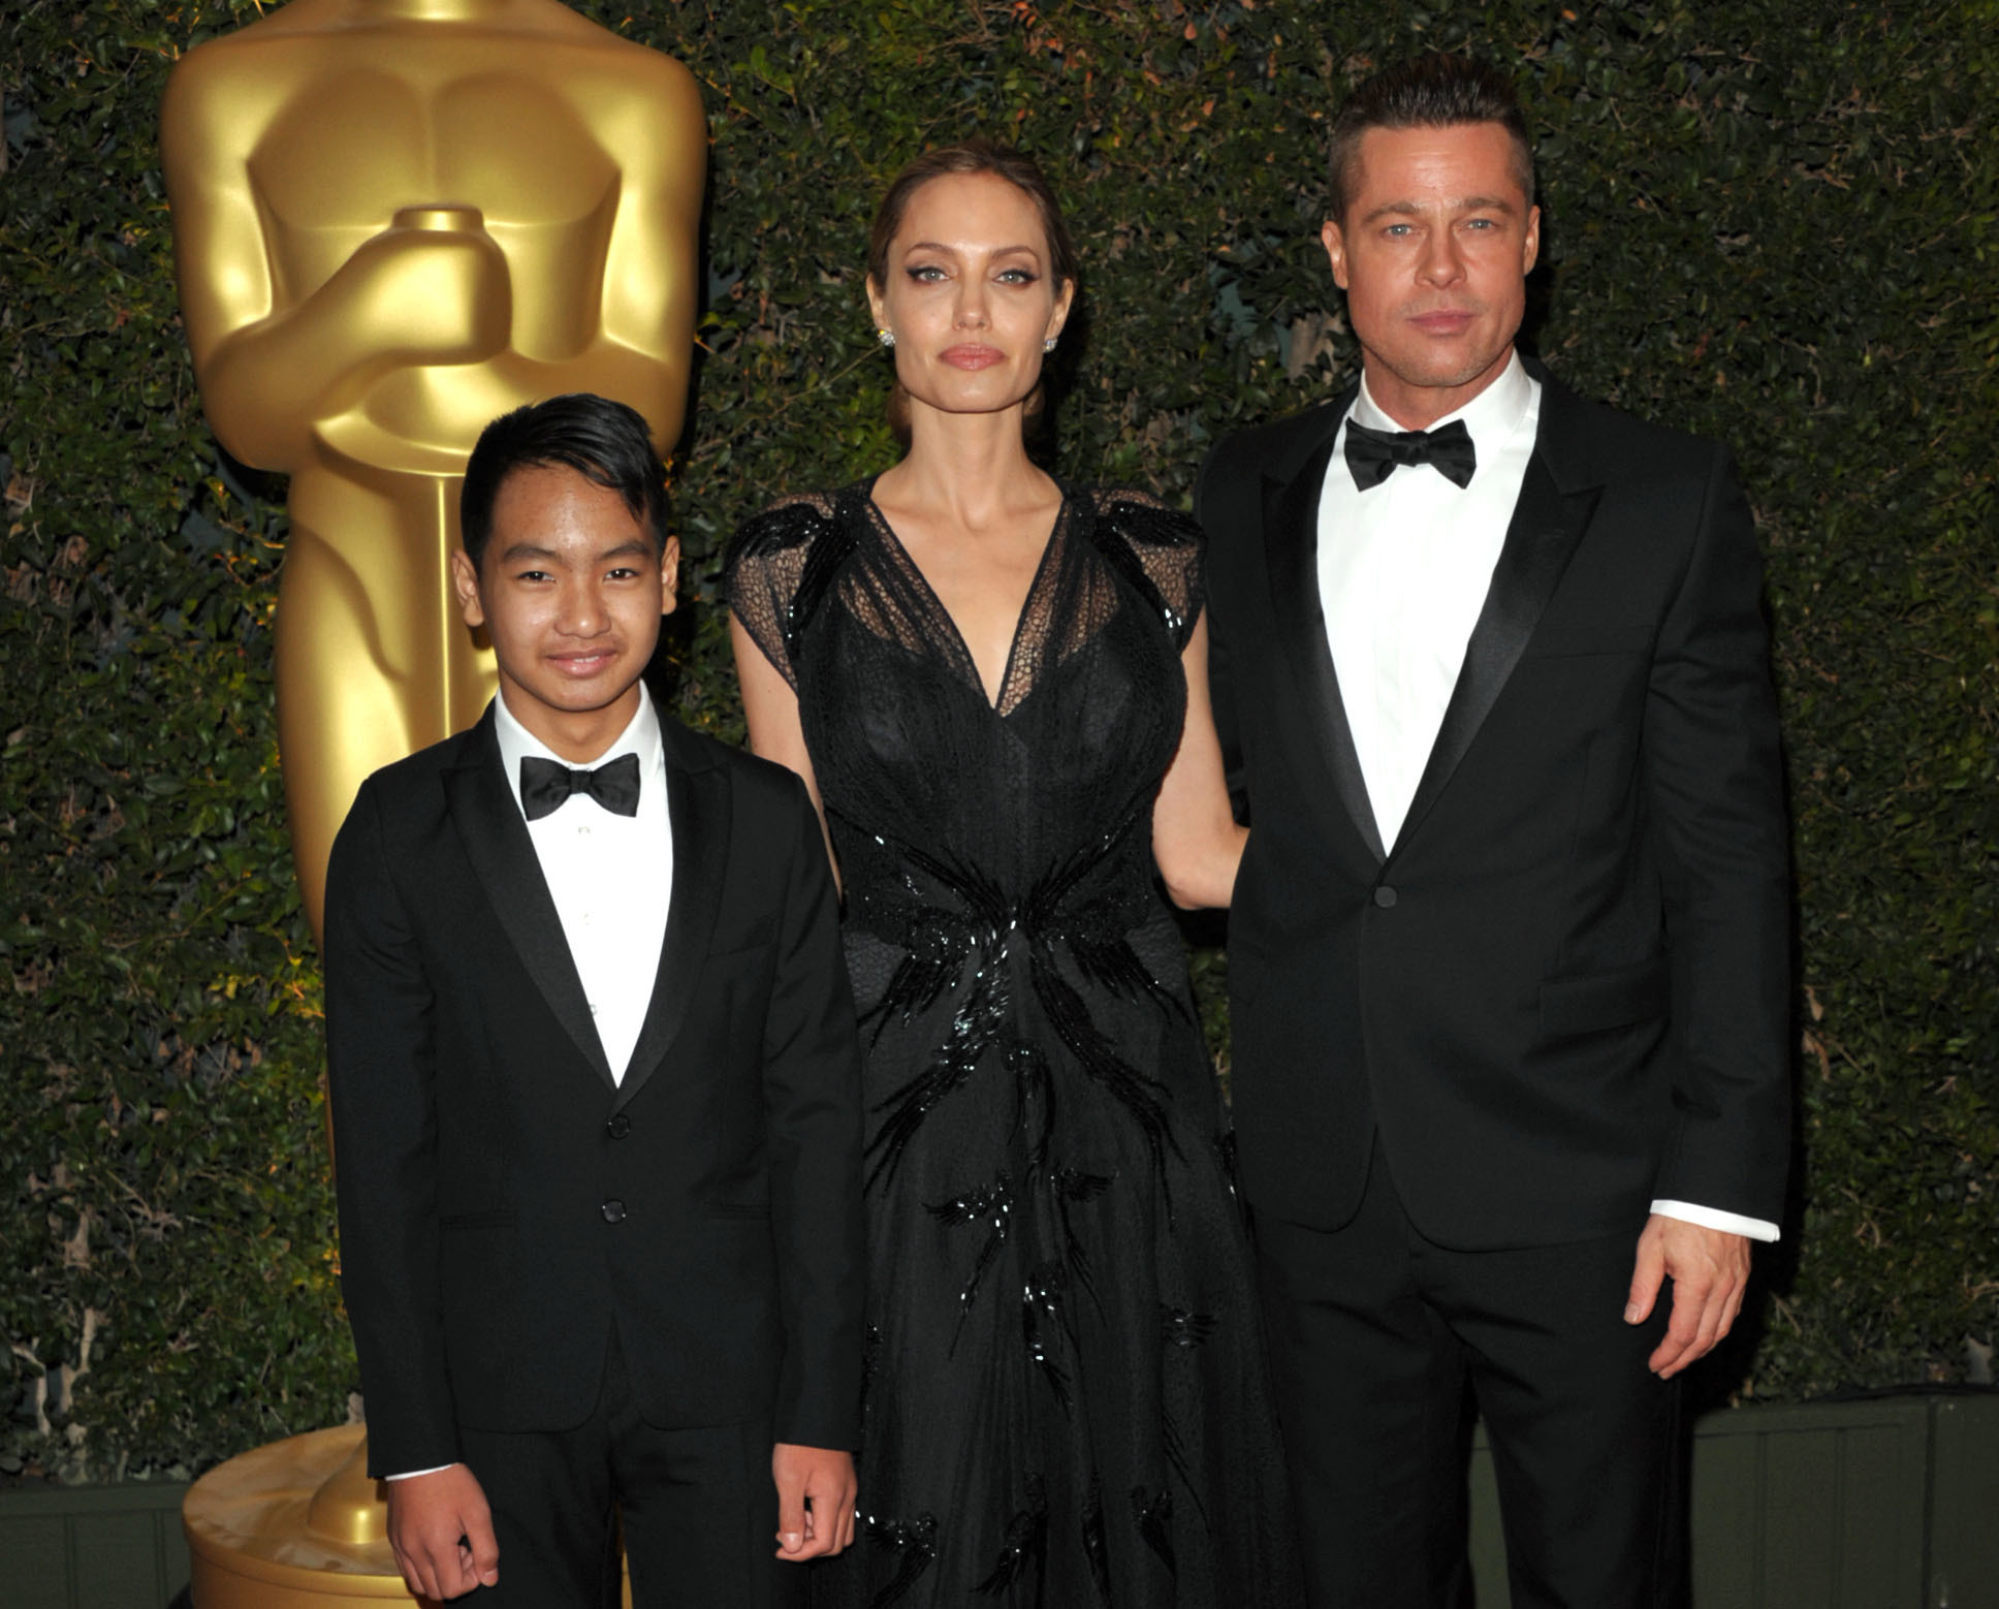 Maddox Jolie-Pitt, Angelina Jolie and Brad Pitt attend the 2013 Governors Awards in Los Angeles in November 2013. Photo: Invision/AP